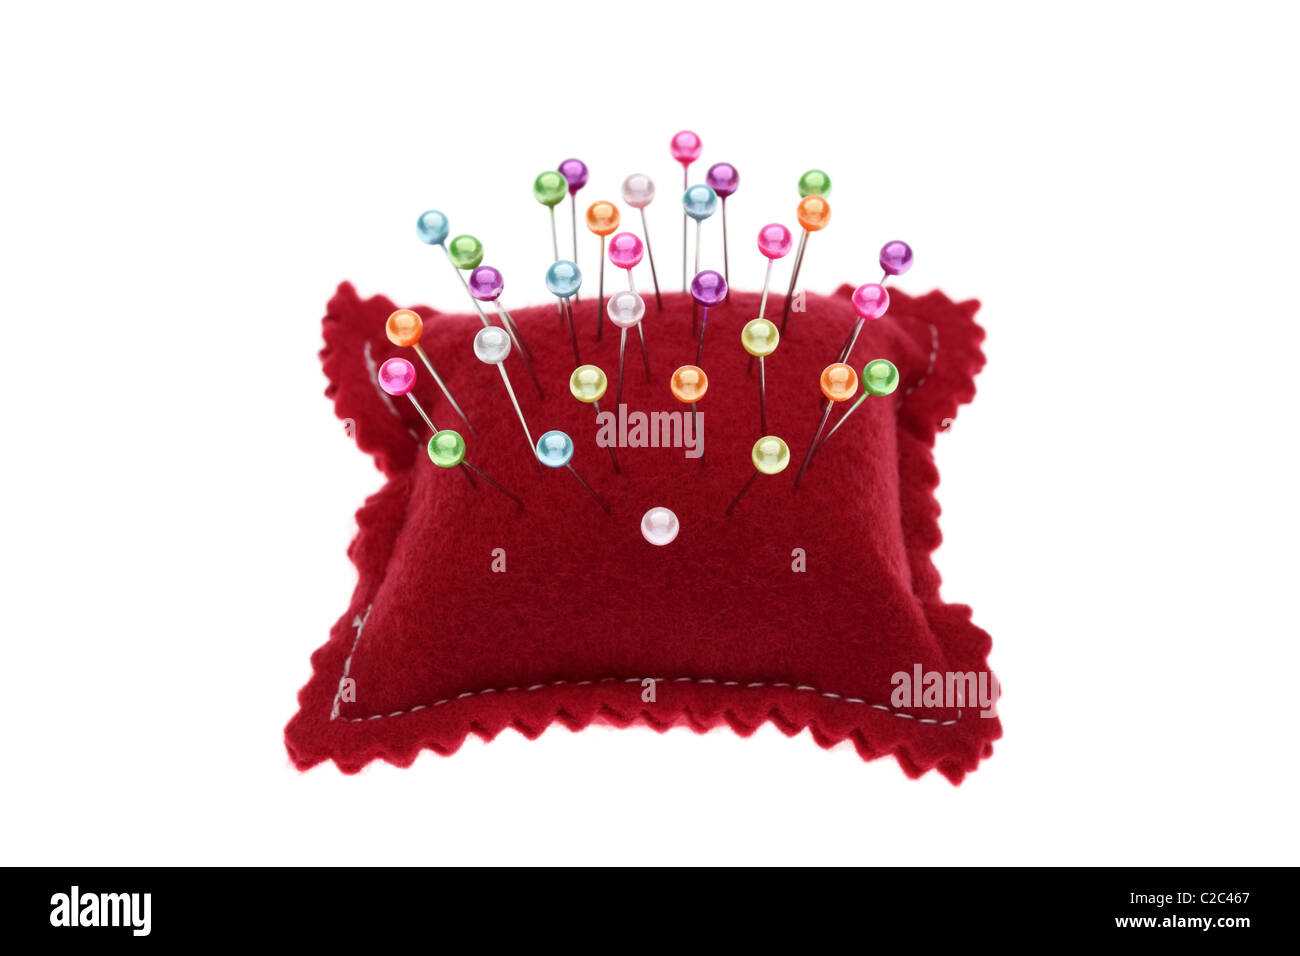 Sewing Pins And Pin Cushion Stock Photo, Picture and Royalty Free Image.  Image 26963484.